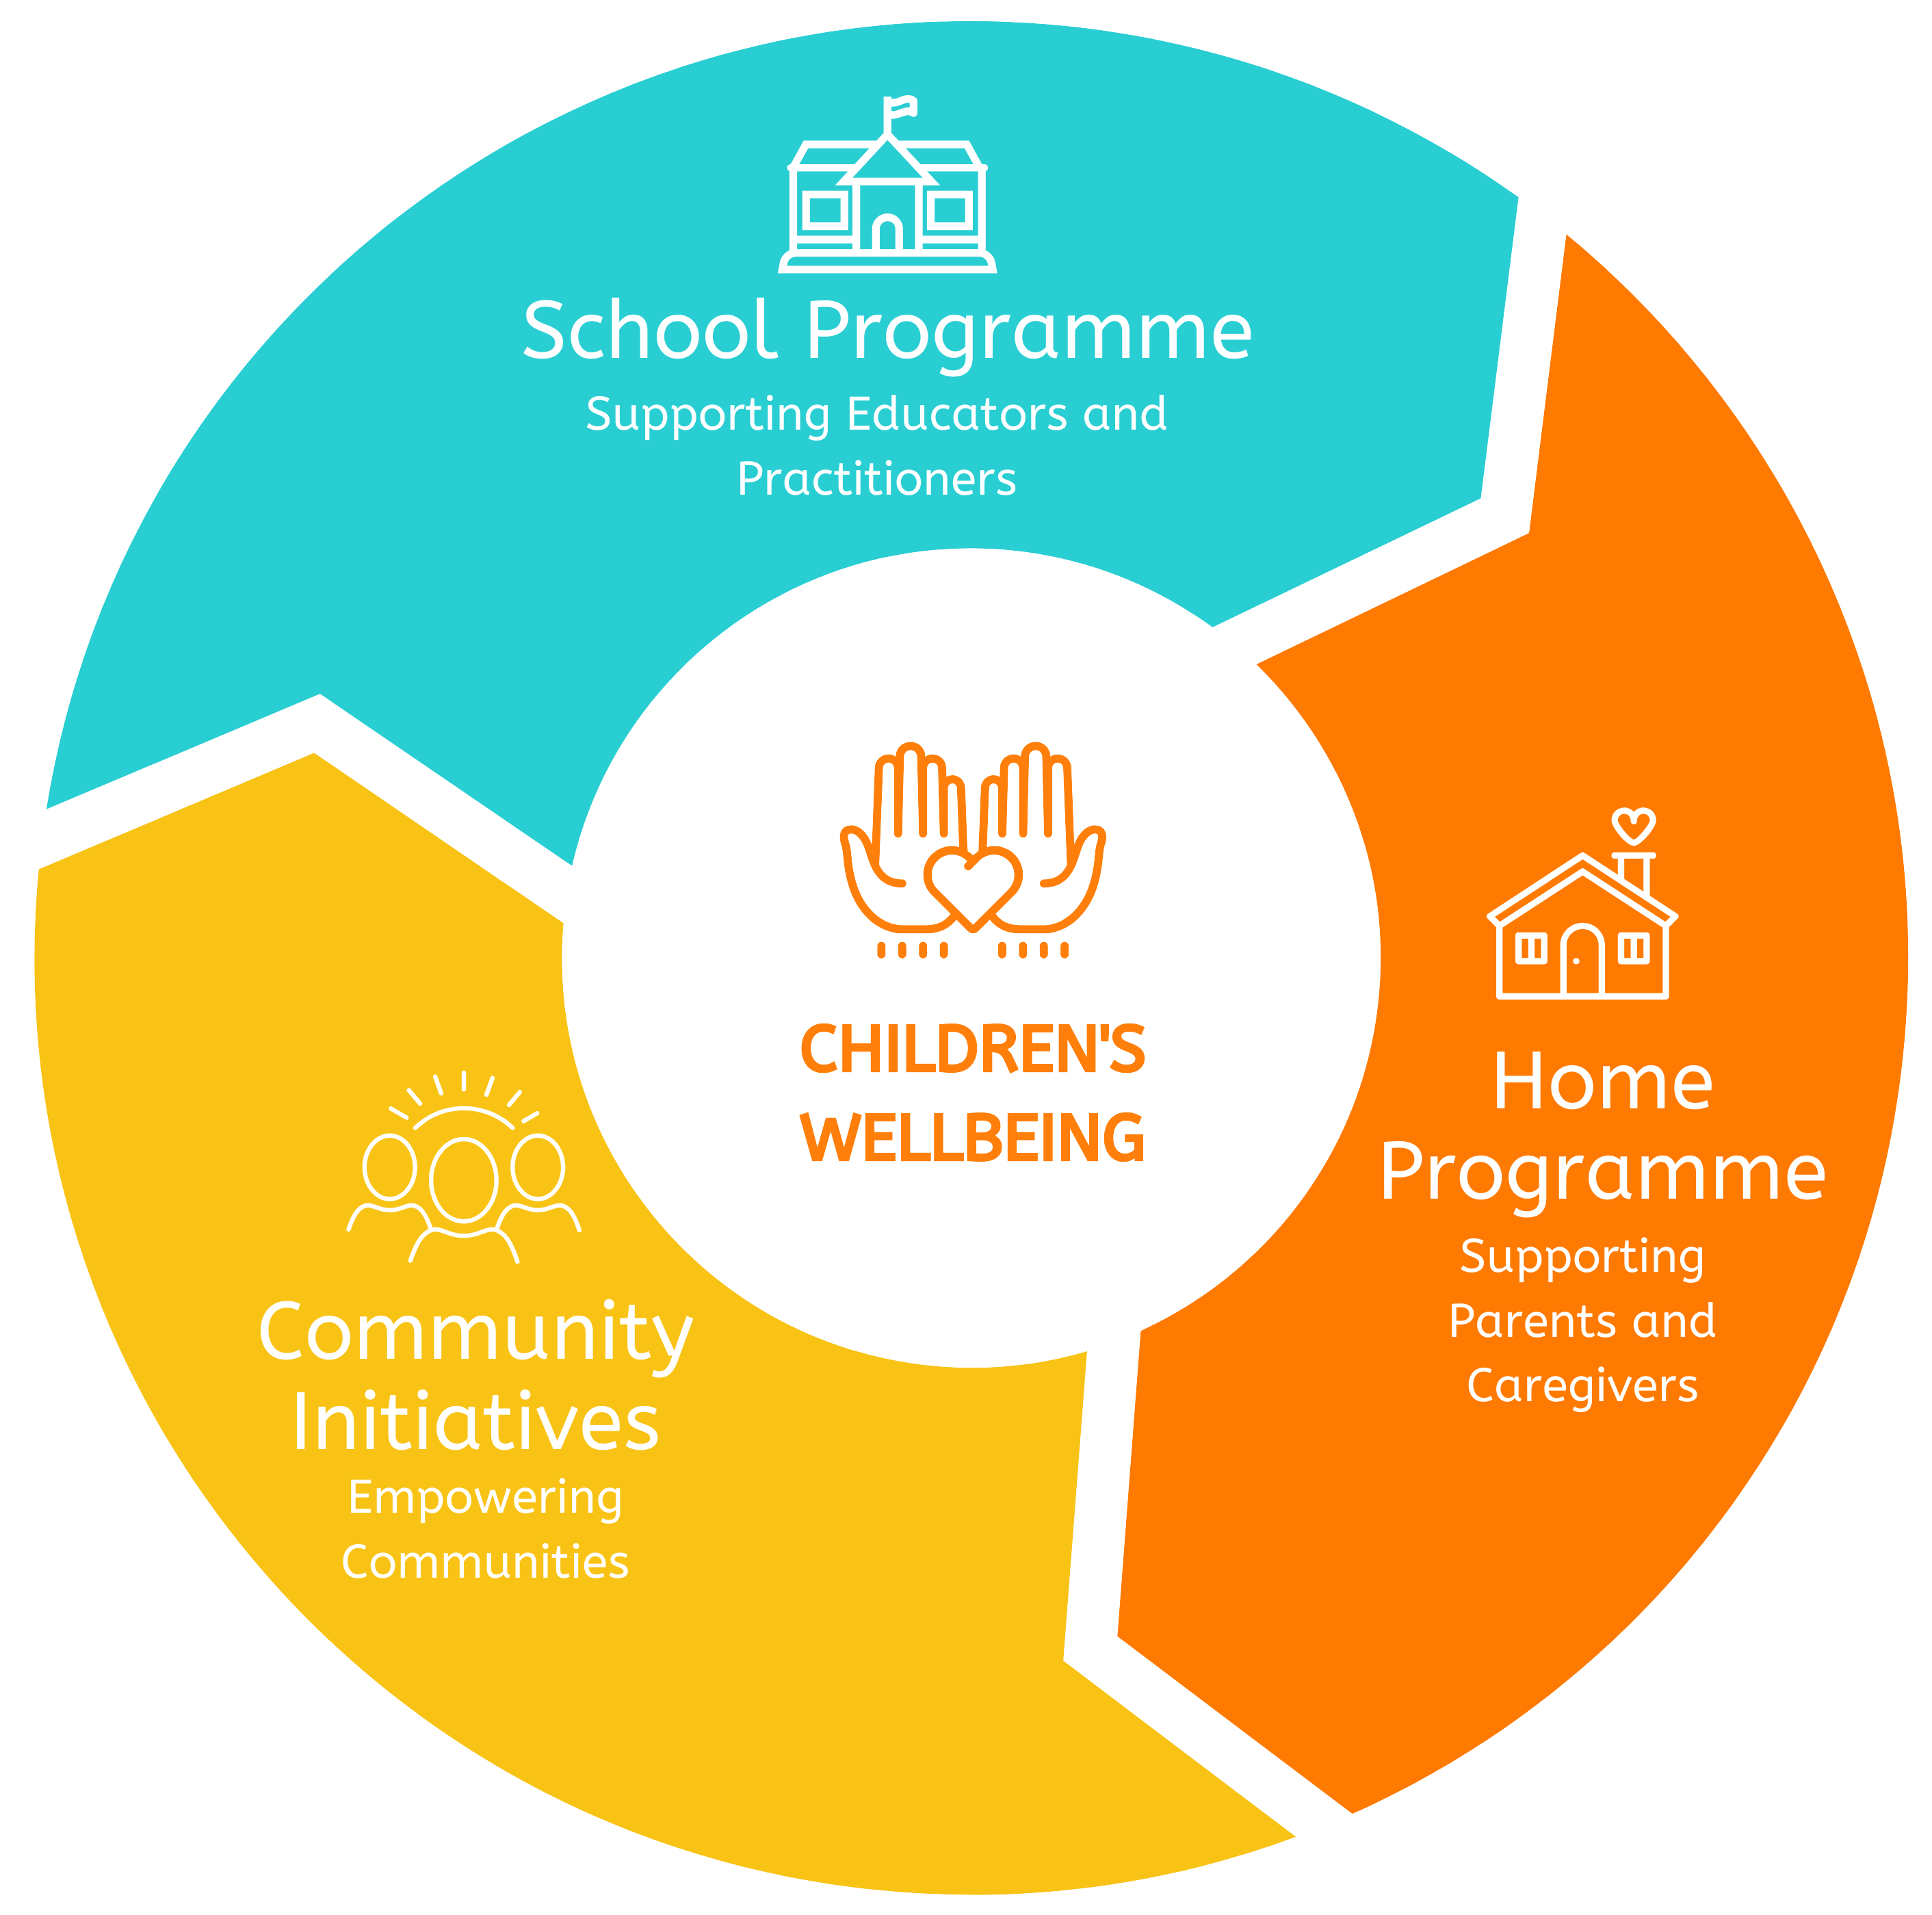 Childrens wellbeing. School Programme, Home Programme Community Initiatives.